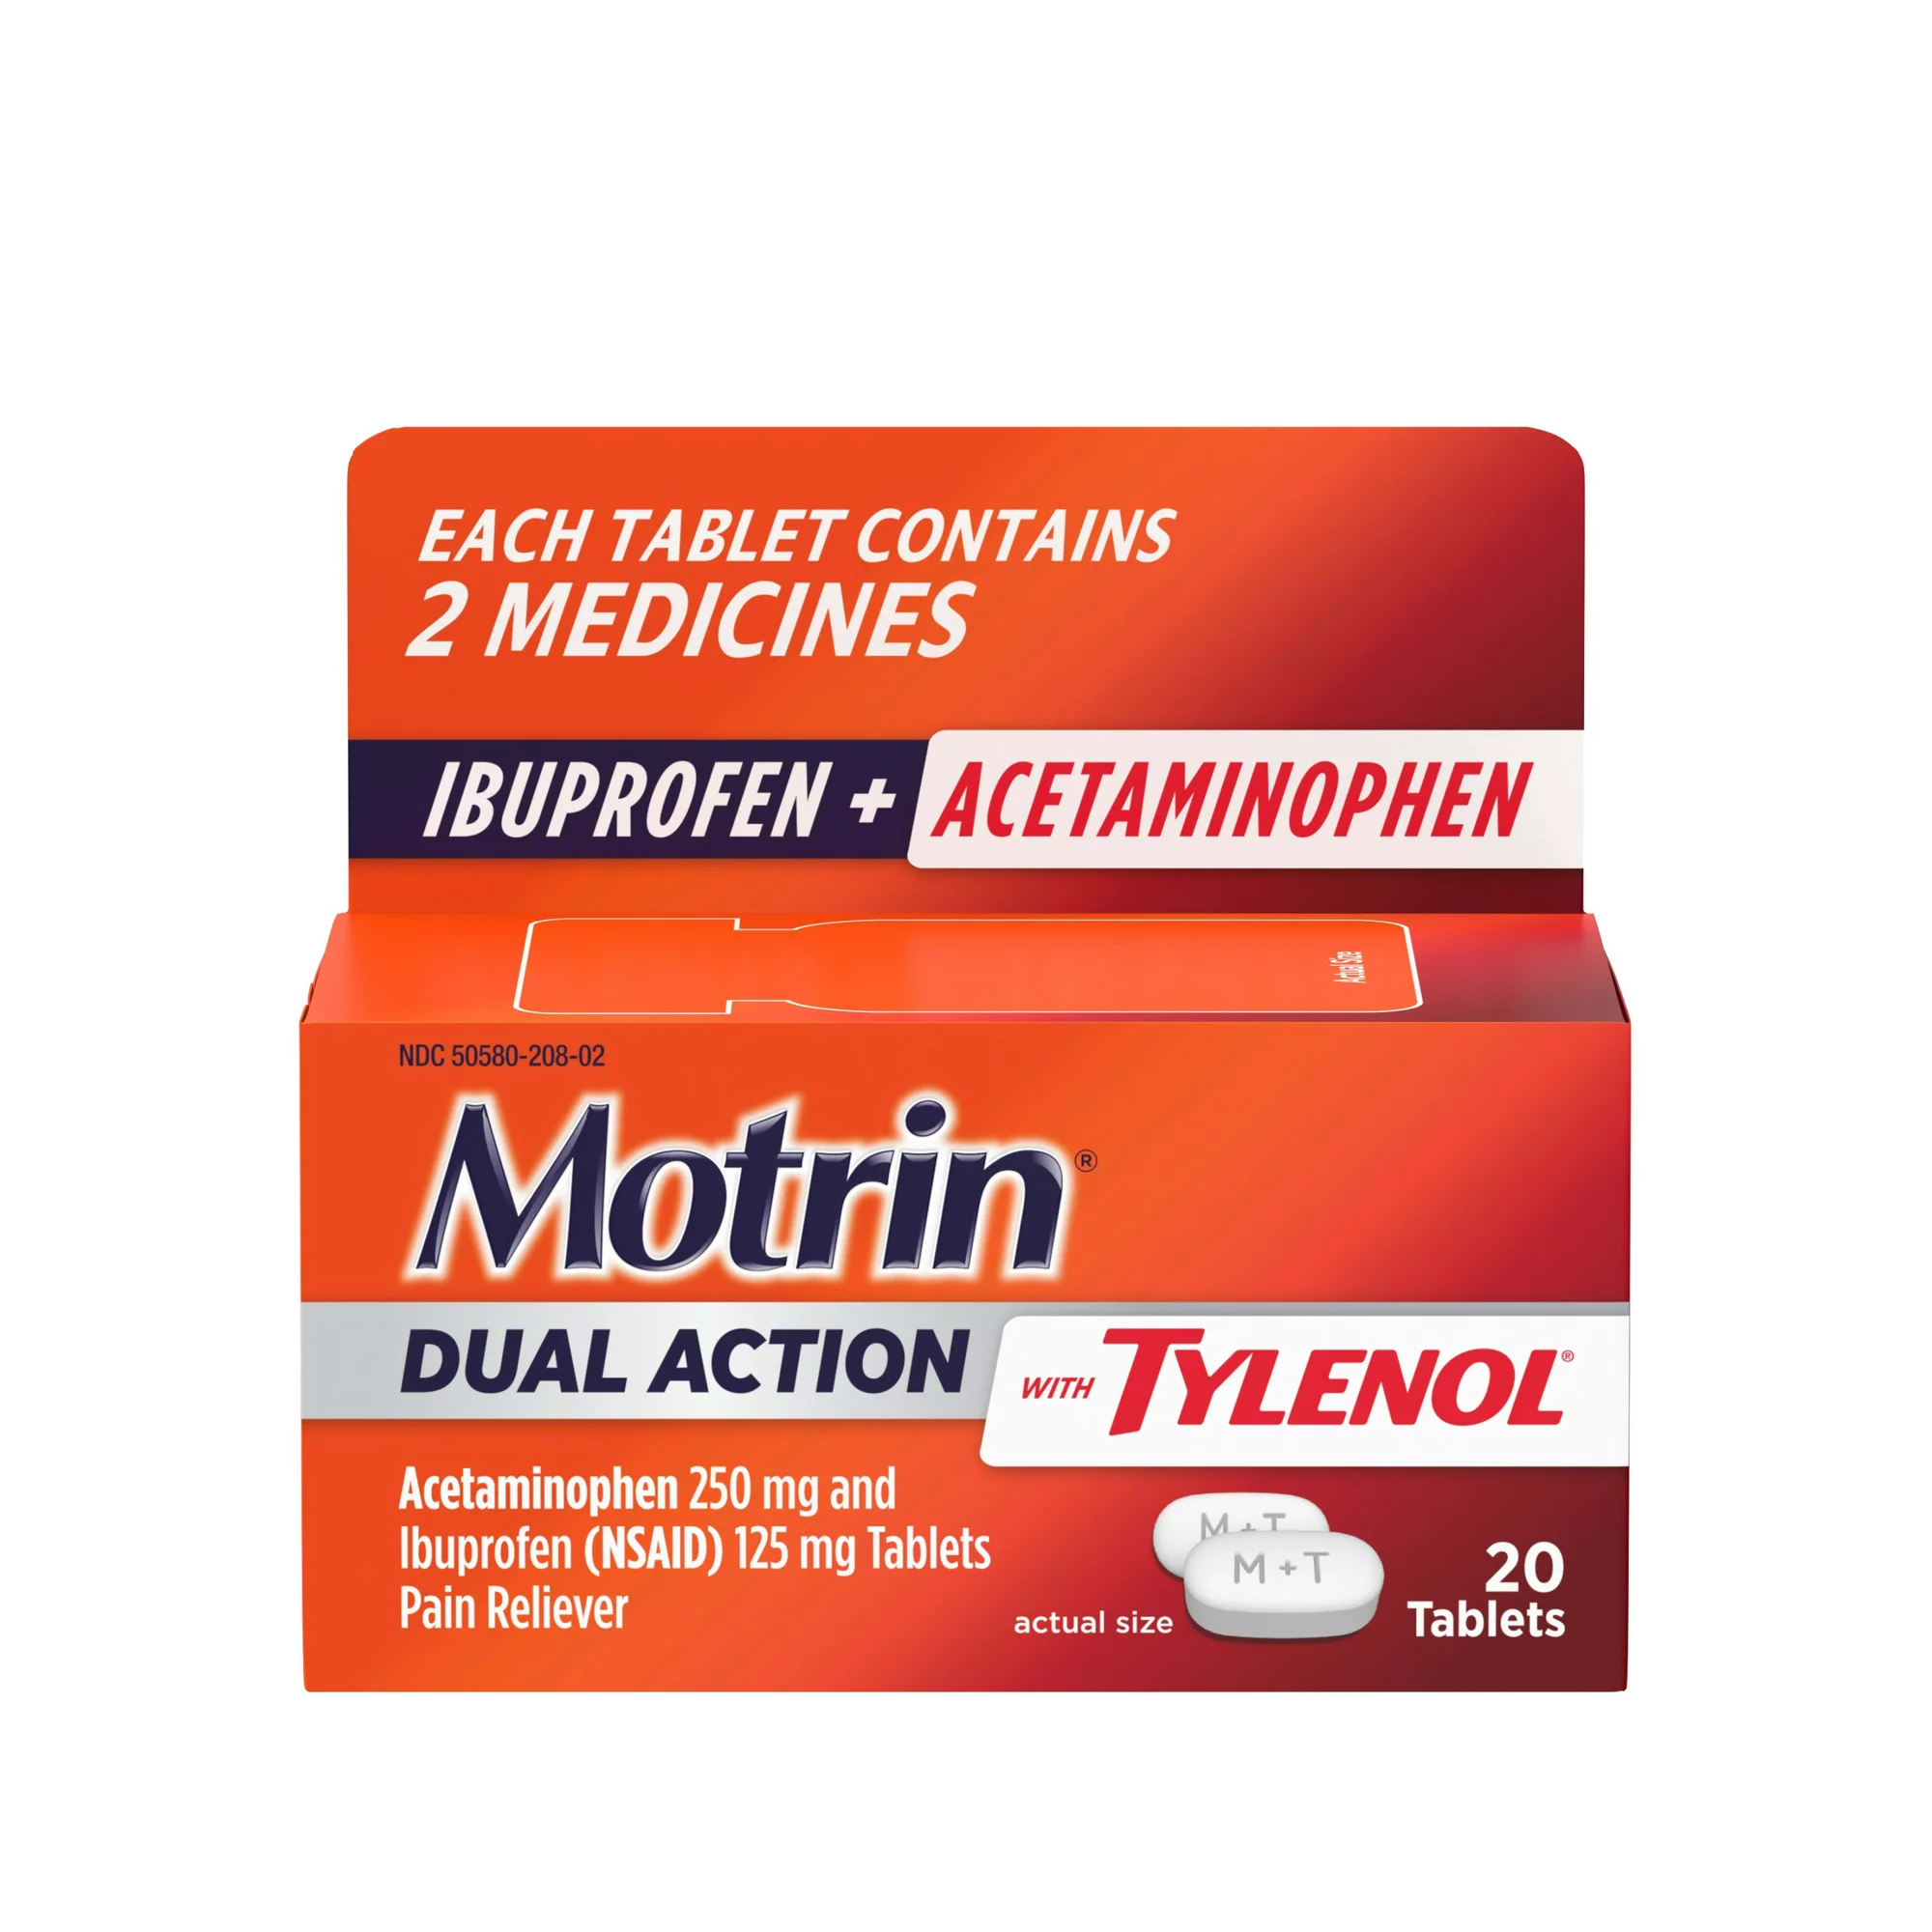 Relieve your pain on any Adult MOTRIN product!